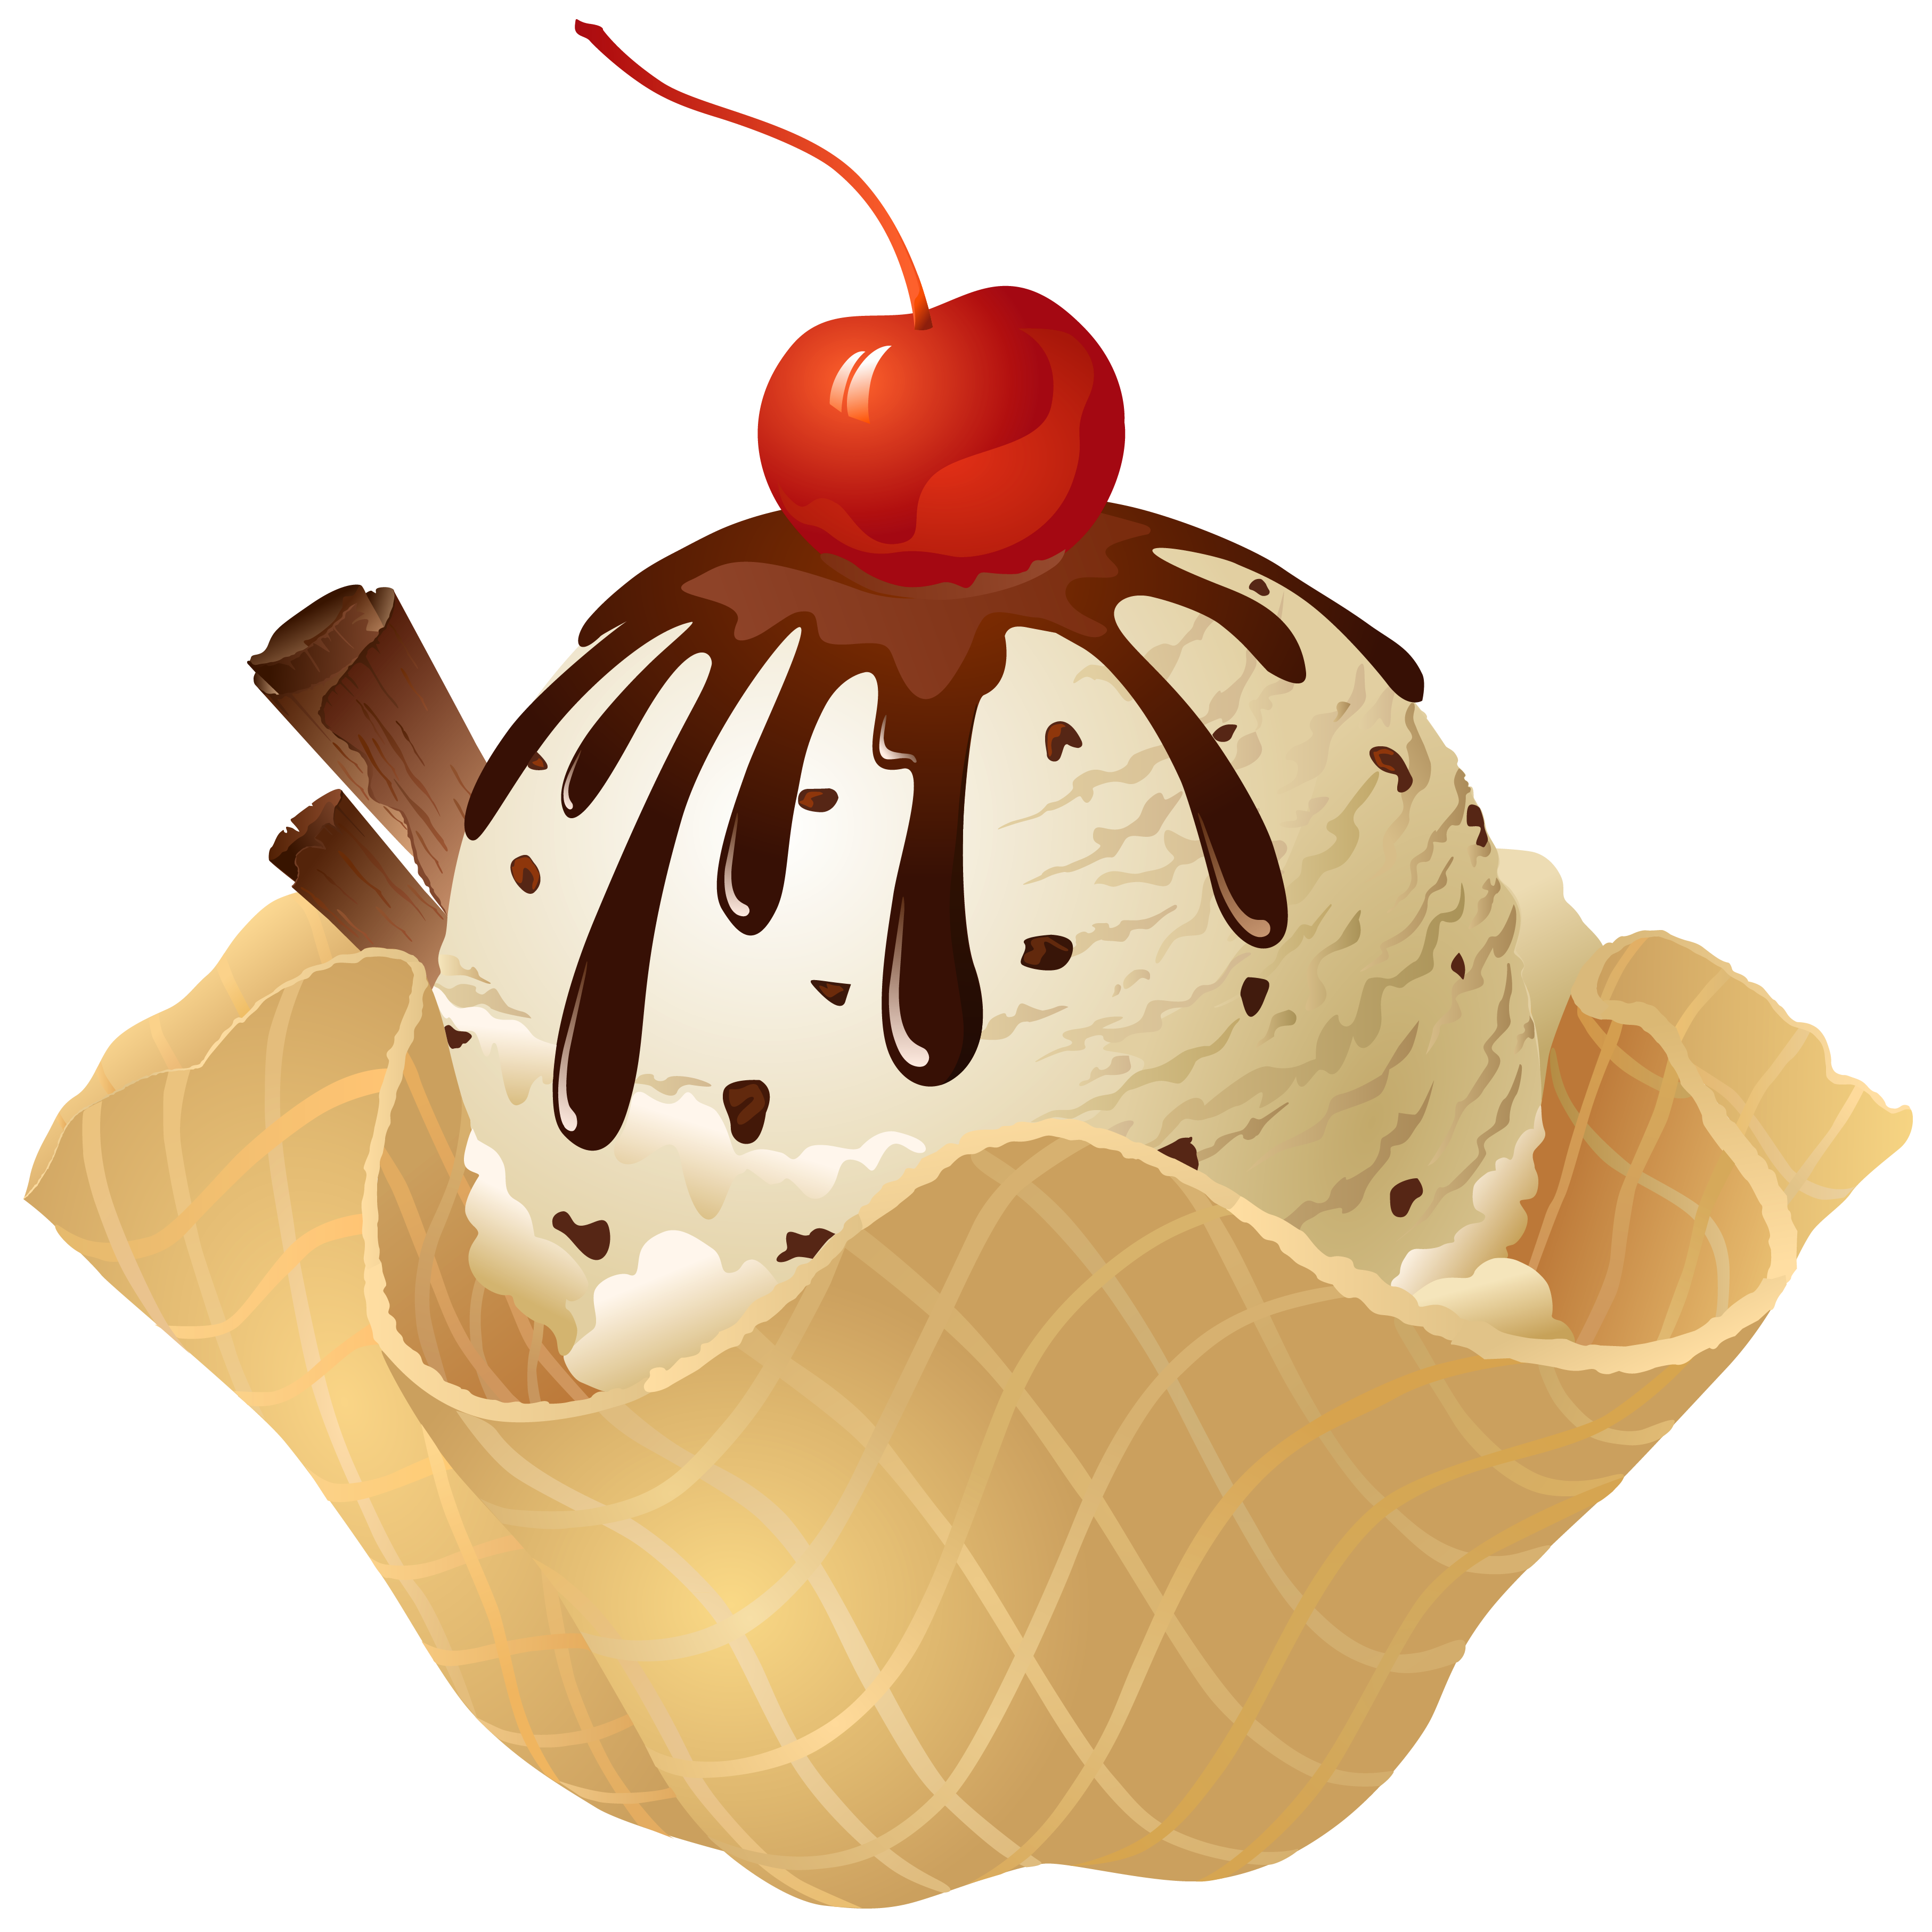 ice cream in a bowl clipart - photo #13